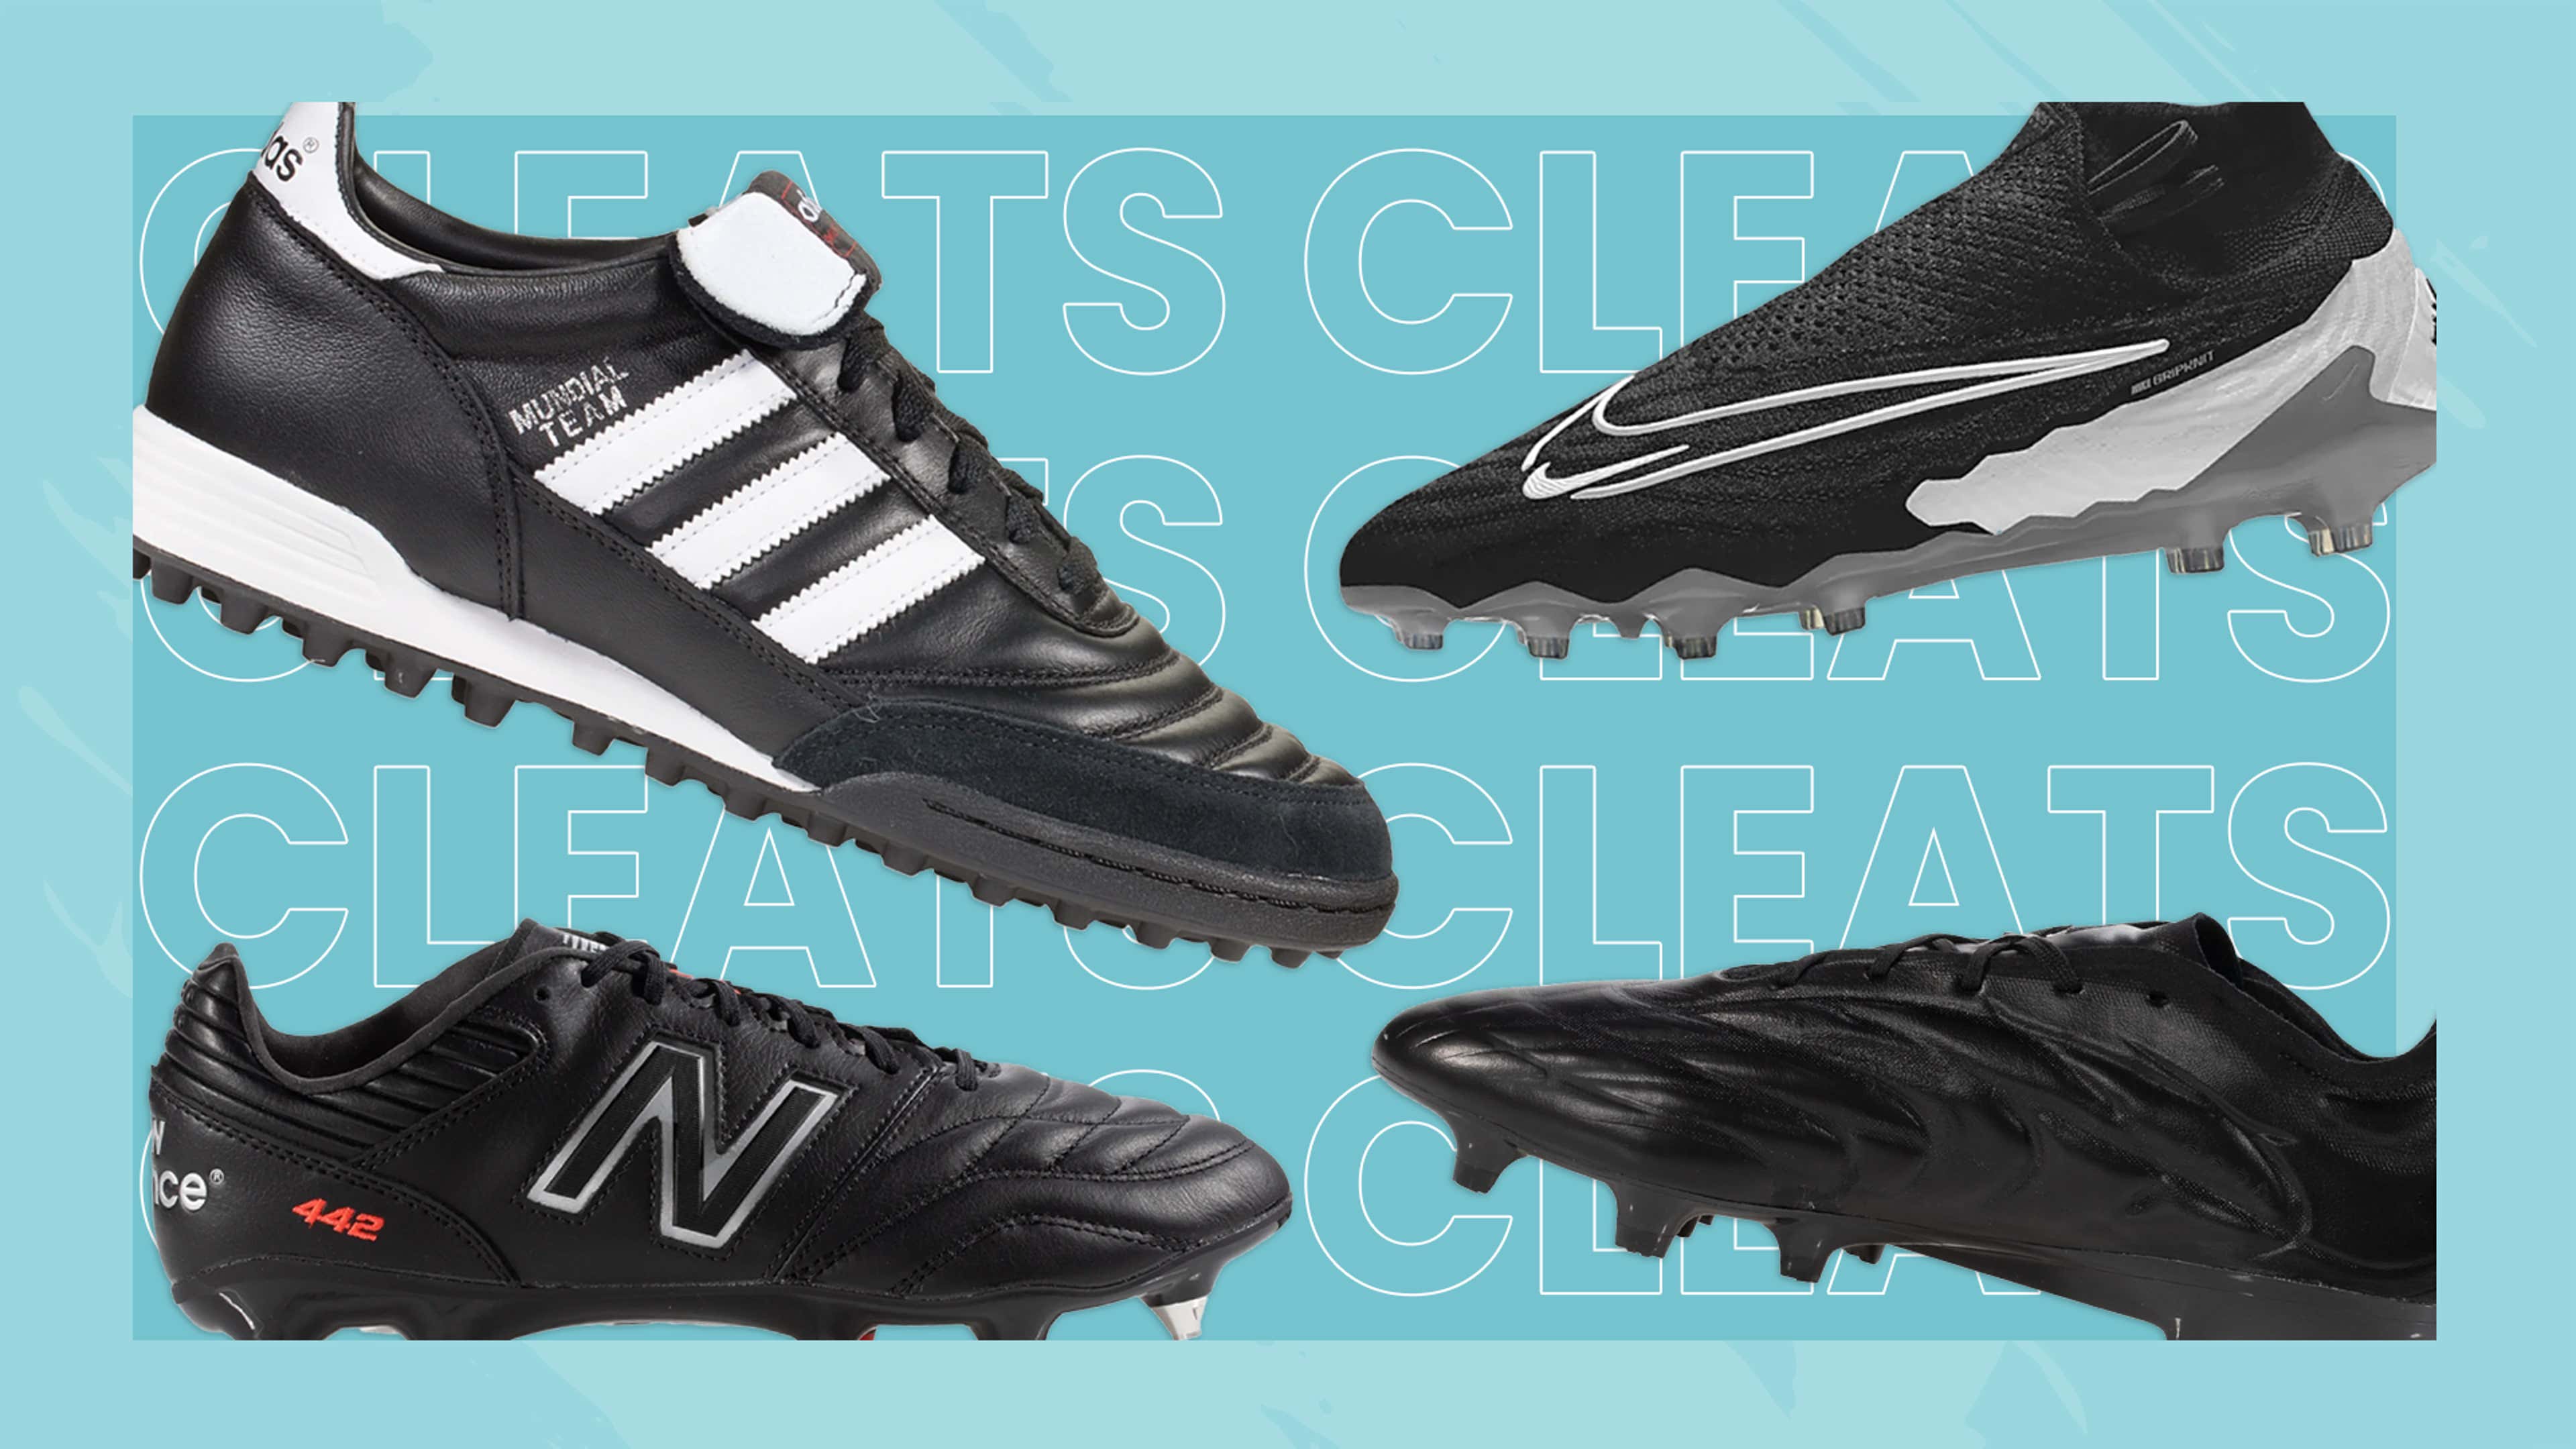 Here's What OFF WHITE x Nike Cleats Might've Looked Like